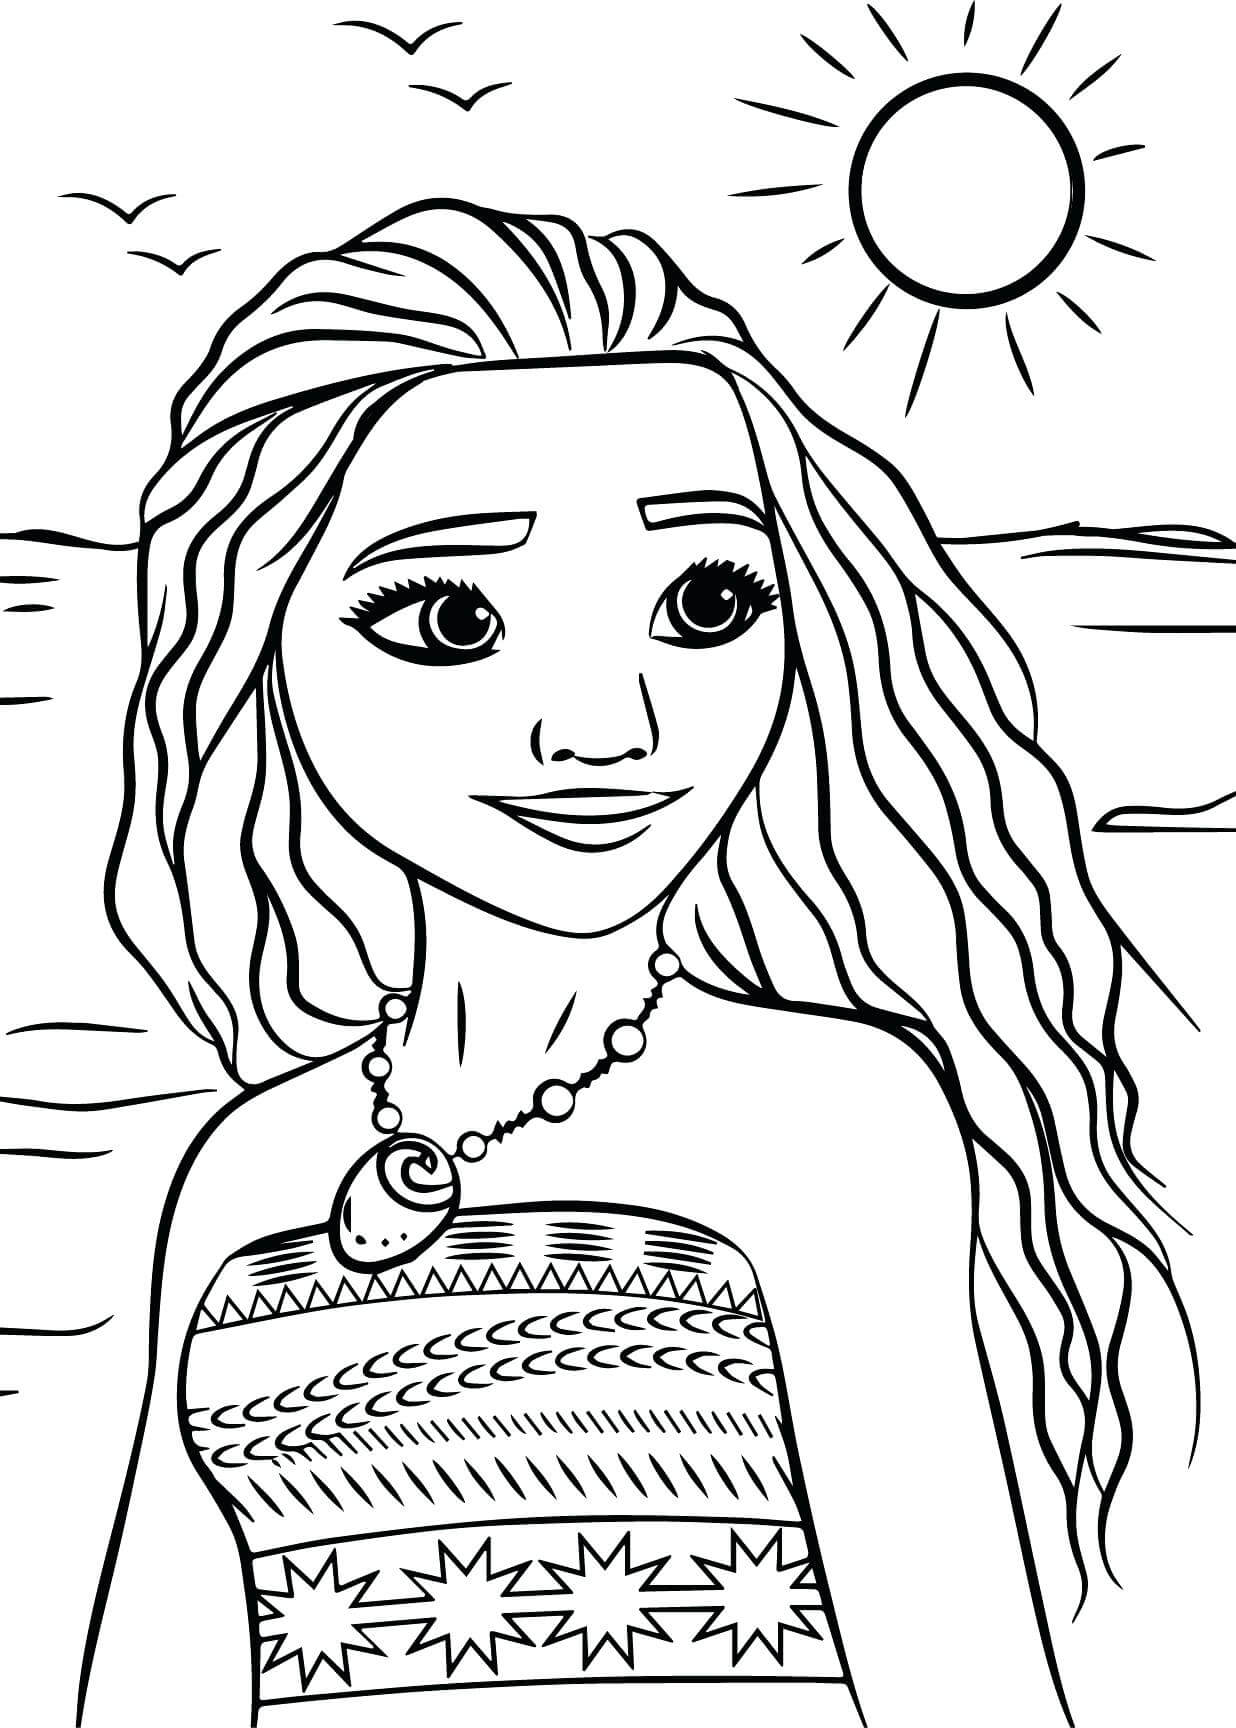 Simple Moana Coloring Page